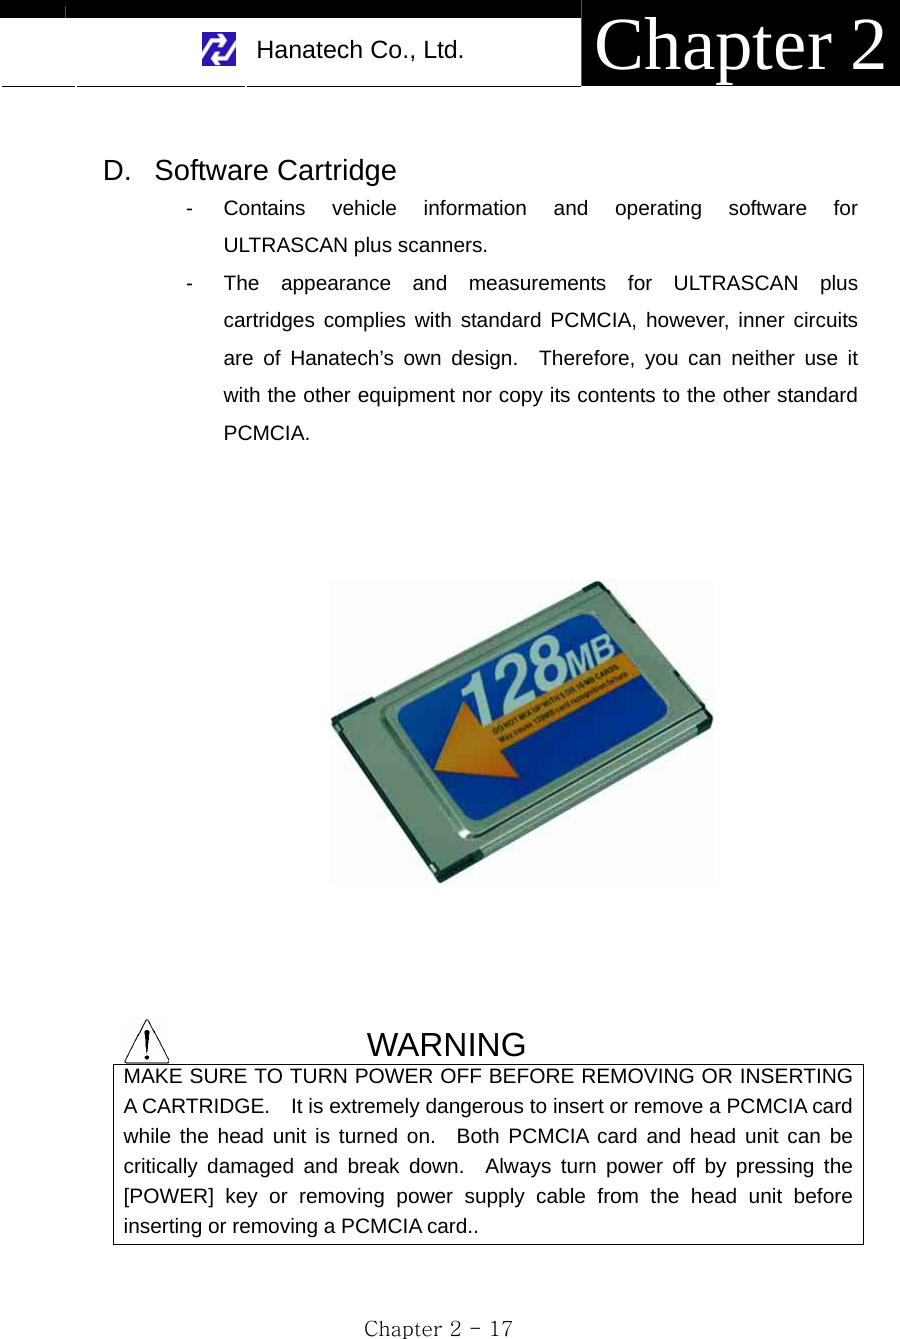     Hanatech Co., Ltd.  Chapter 2 Chapter 2 - 17  D. Software Cartridge -  Contains vehicle information and operating software for ULTRASCAN plus scanners. -  The appearance and measurements for ULTRASCAN plus cartridges complies with standard PCMCIA, however, inner circuits are of Hanatech’s own design.  Therefore, you can neither use it with the other equipment nor copy its contents to the other standard PCMCIA.         WARNING MAKE SURE TO TURN POWER OFF BEFORE REMOVING OR INSERTING A CARTRIDGE.    It is extremely dangerous to insert or remove a PCMCIA card while the head unit is turned on.  Both PCMCIA card and head unit can be critically damaged and break down.  Always turn power off by pressing the [POWER] key or removing power supply cable from the head unit before inserting or removing a PCMCIA card..  